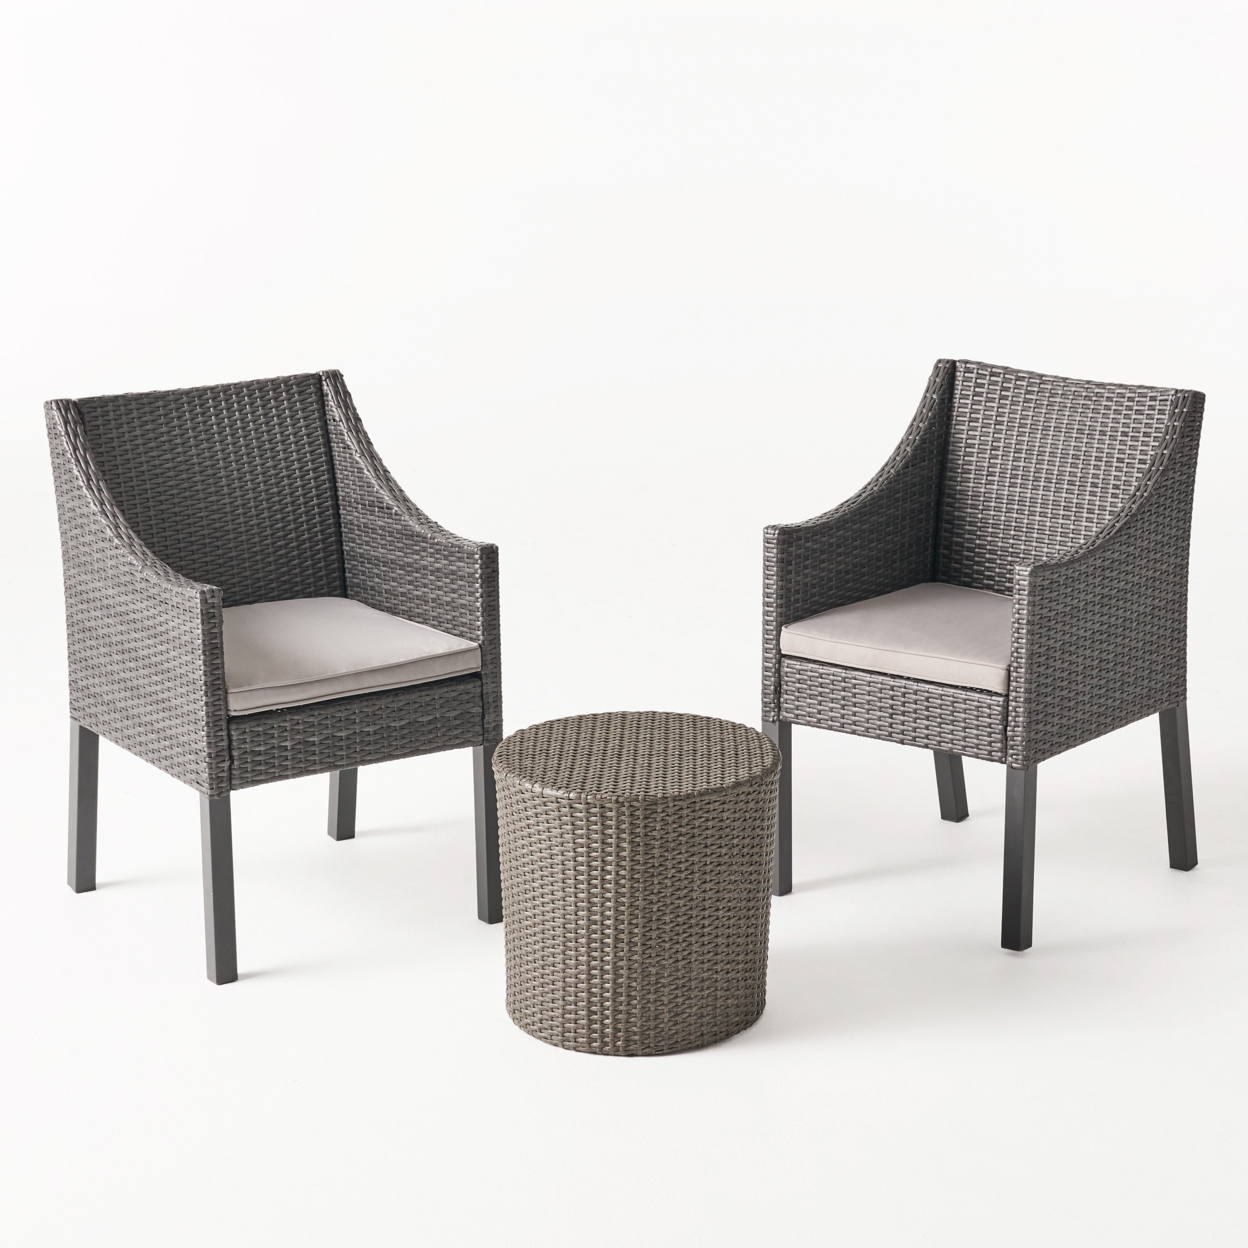 Sims Outdoor 3 Piece Wicker Chat Set, Grey With Silver Cushions